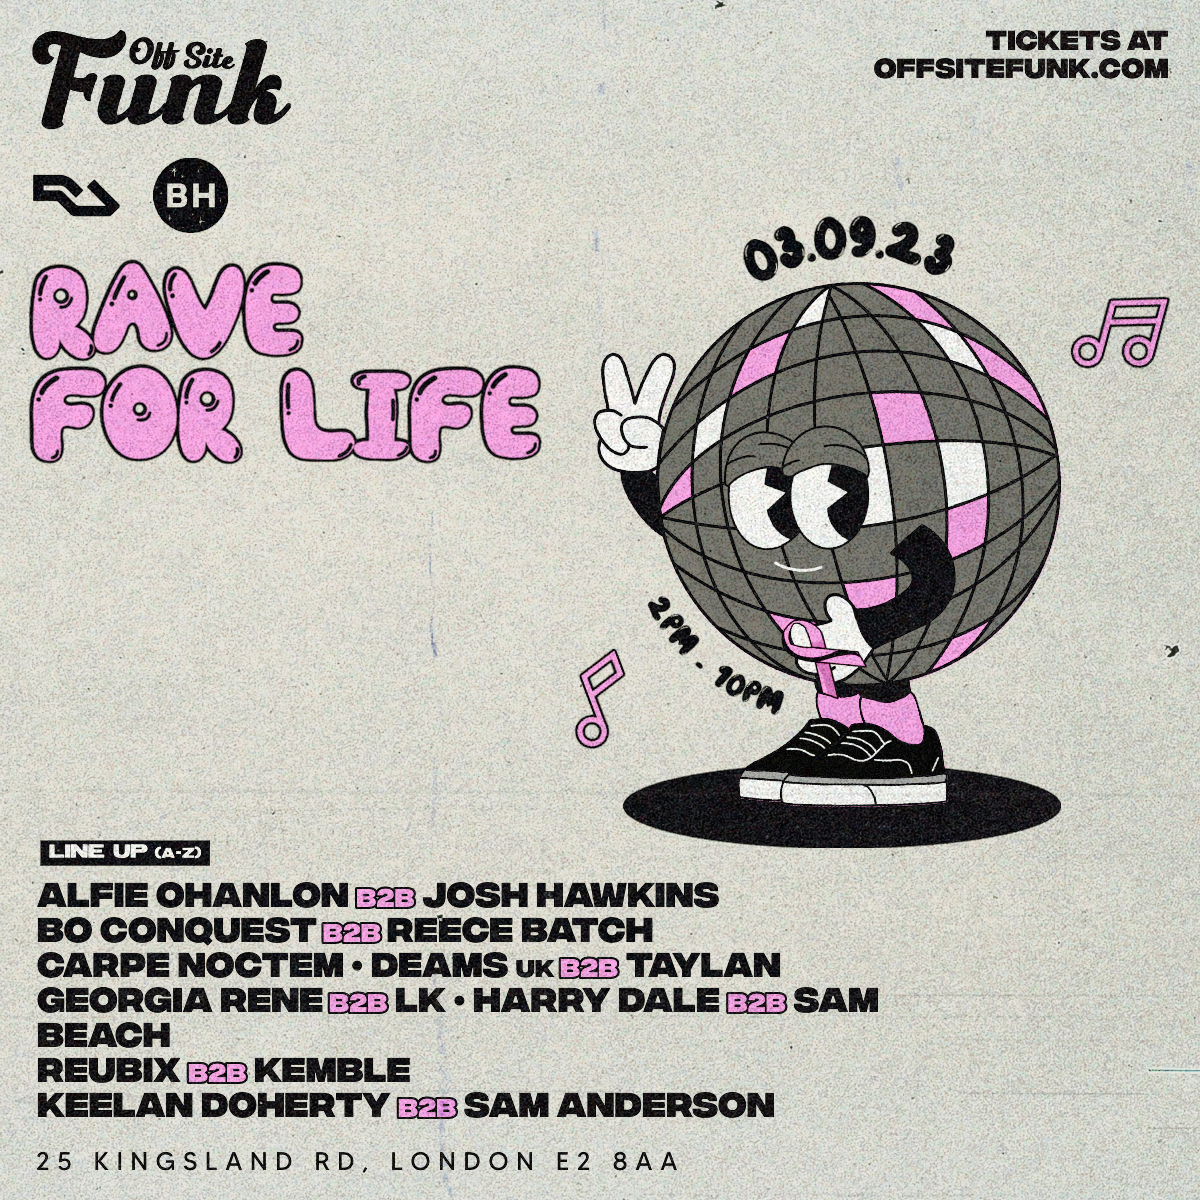 Off Site Funk - Rave For Life (Charity Event) - Página frontal